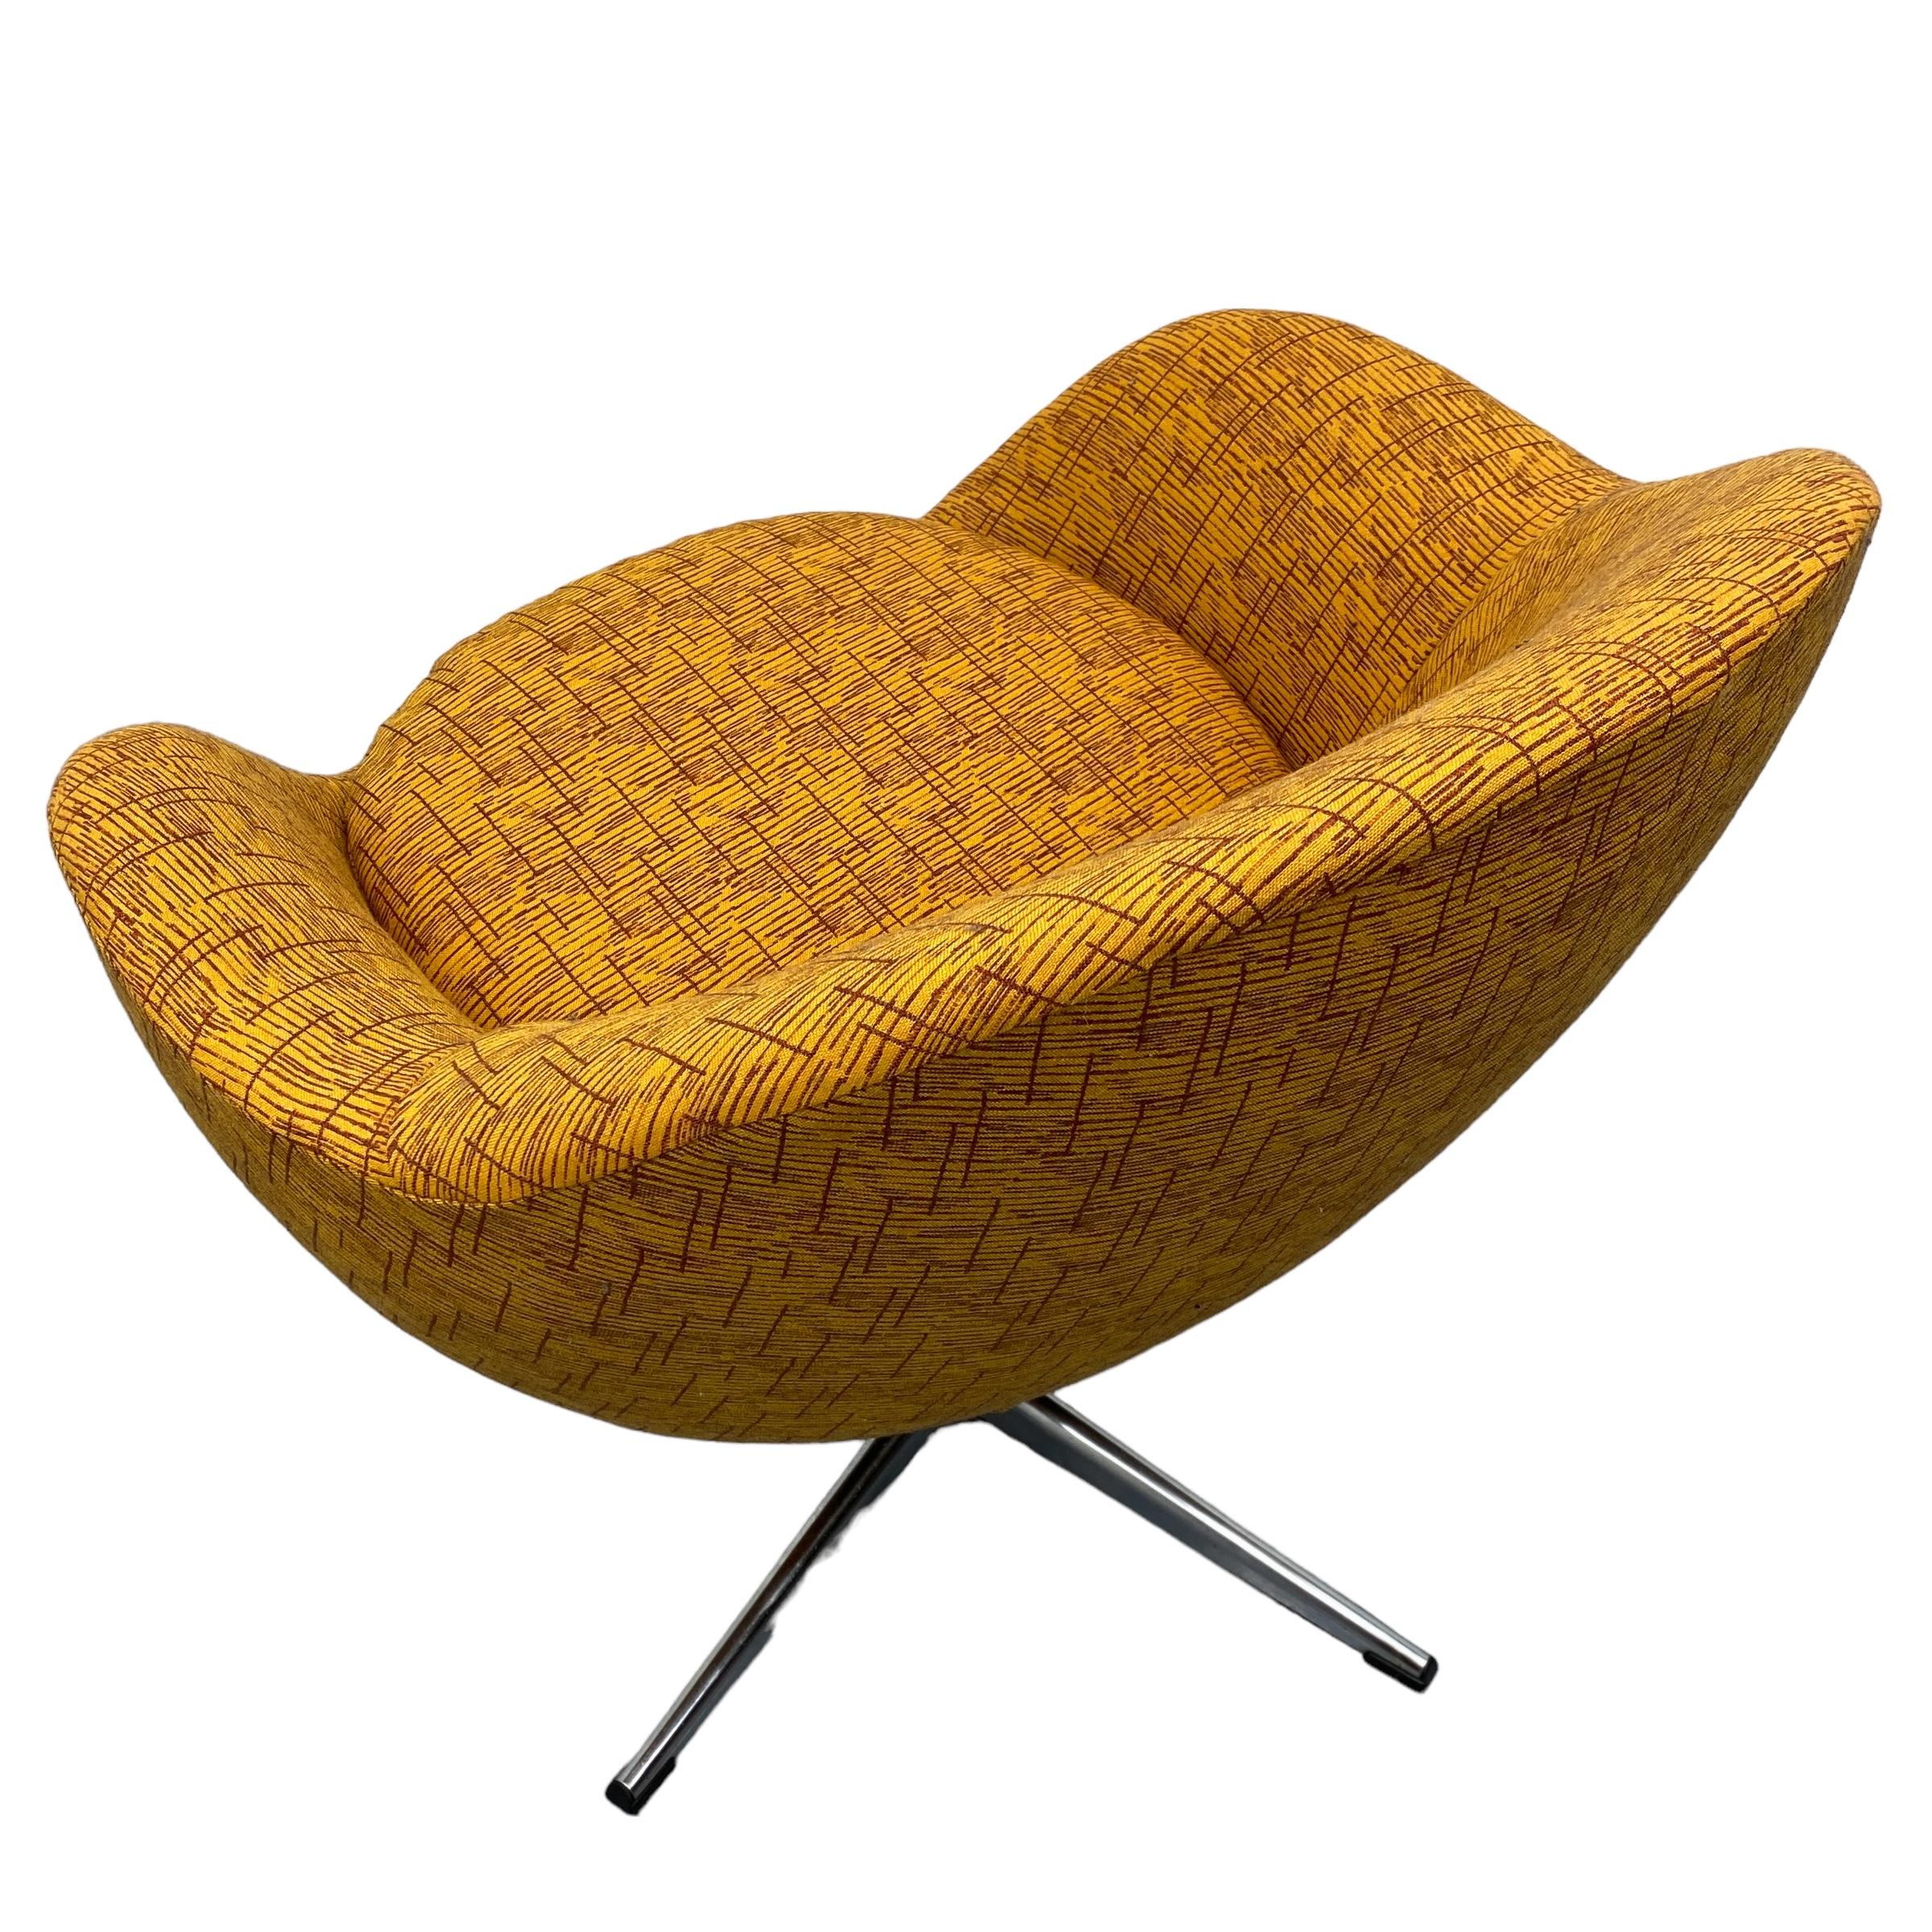 A fabulous midcentury lounge chair by Swedish manufacturers Overman. This Swedish swivel egg chair has a steel base & an interesting curved shape. The chair has been recently professionally reupholstered in orange vintage style fabric. A beautiful